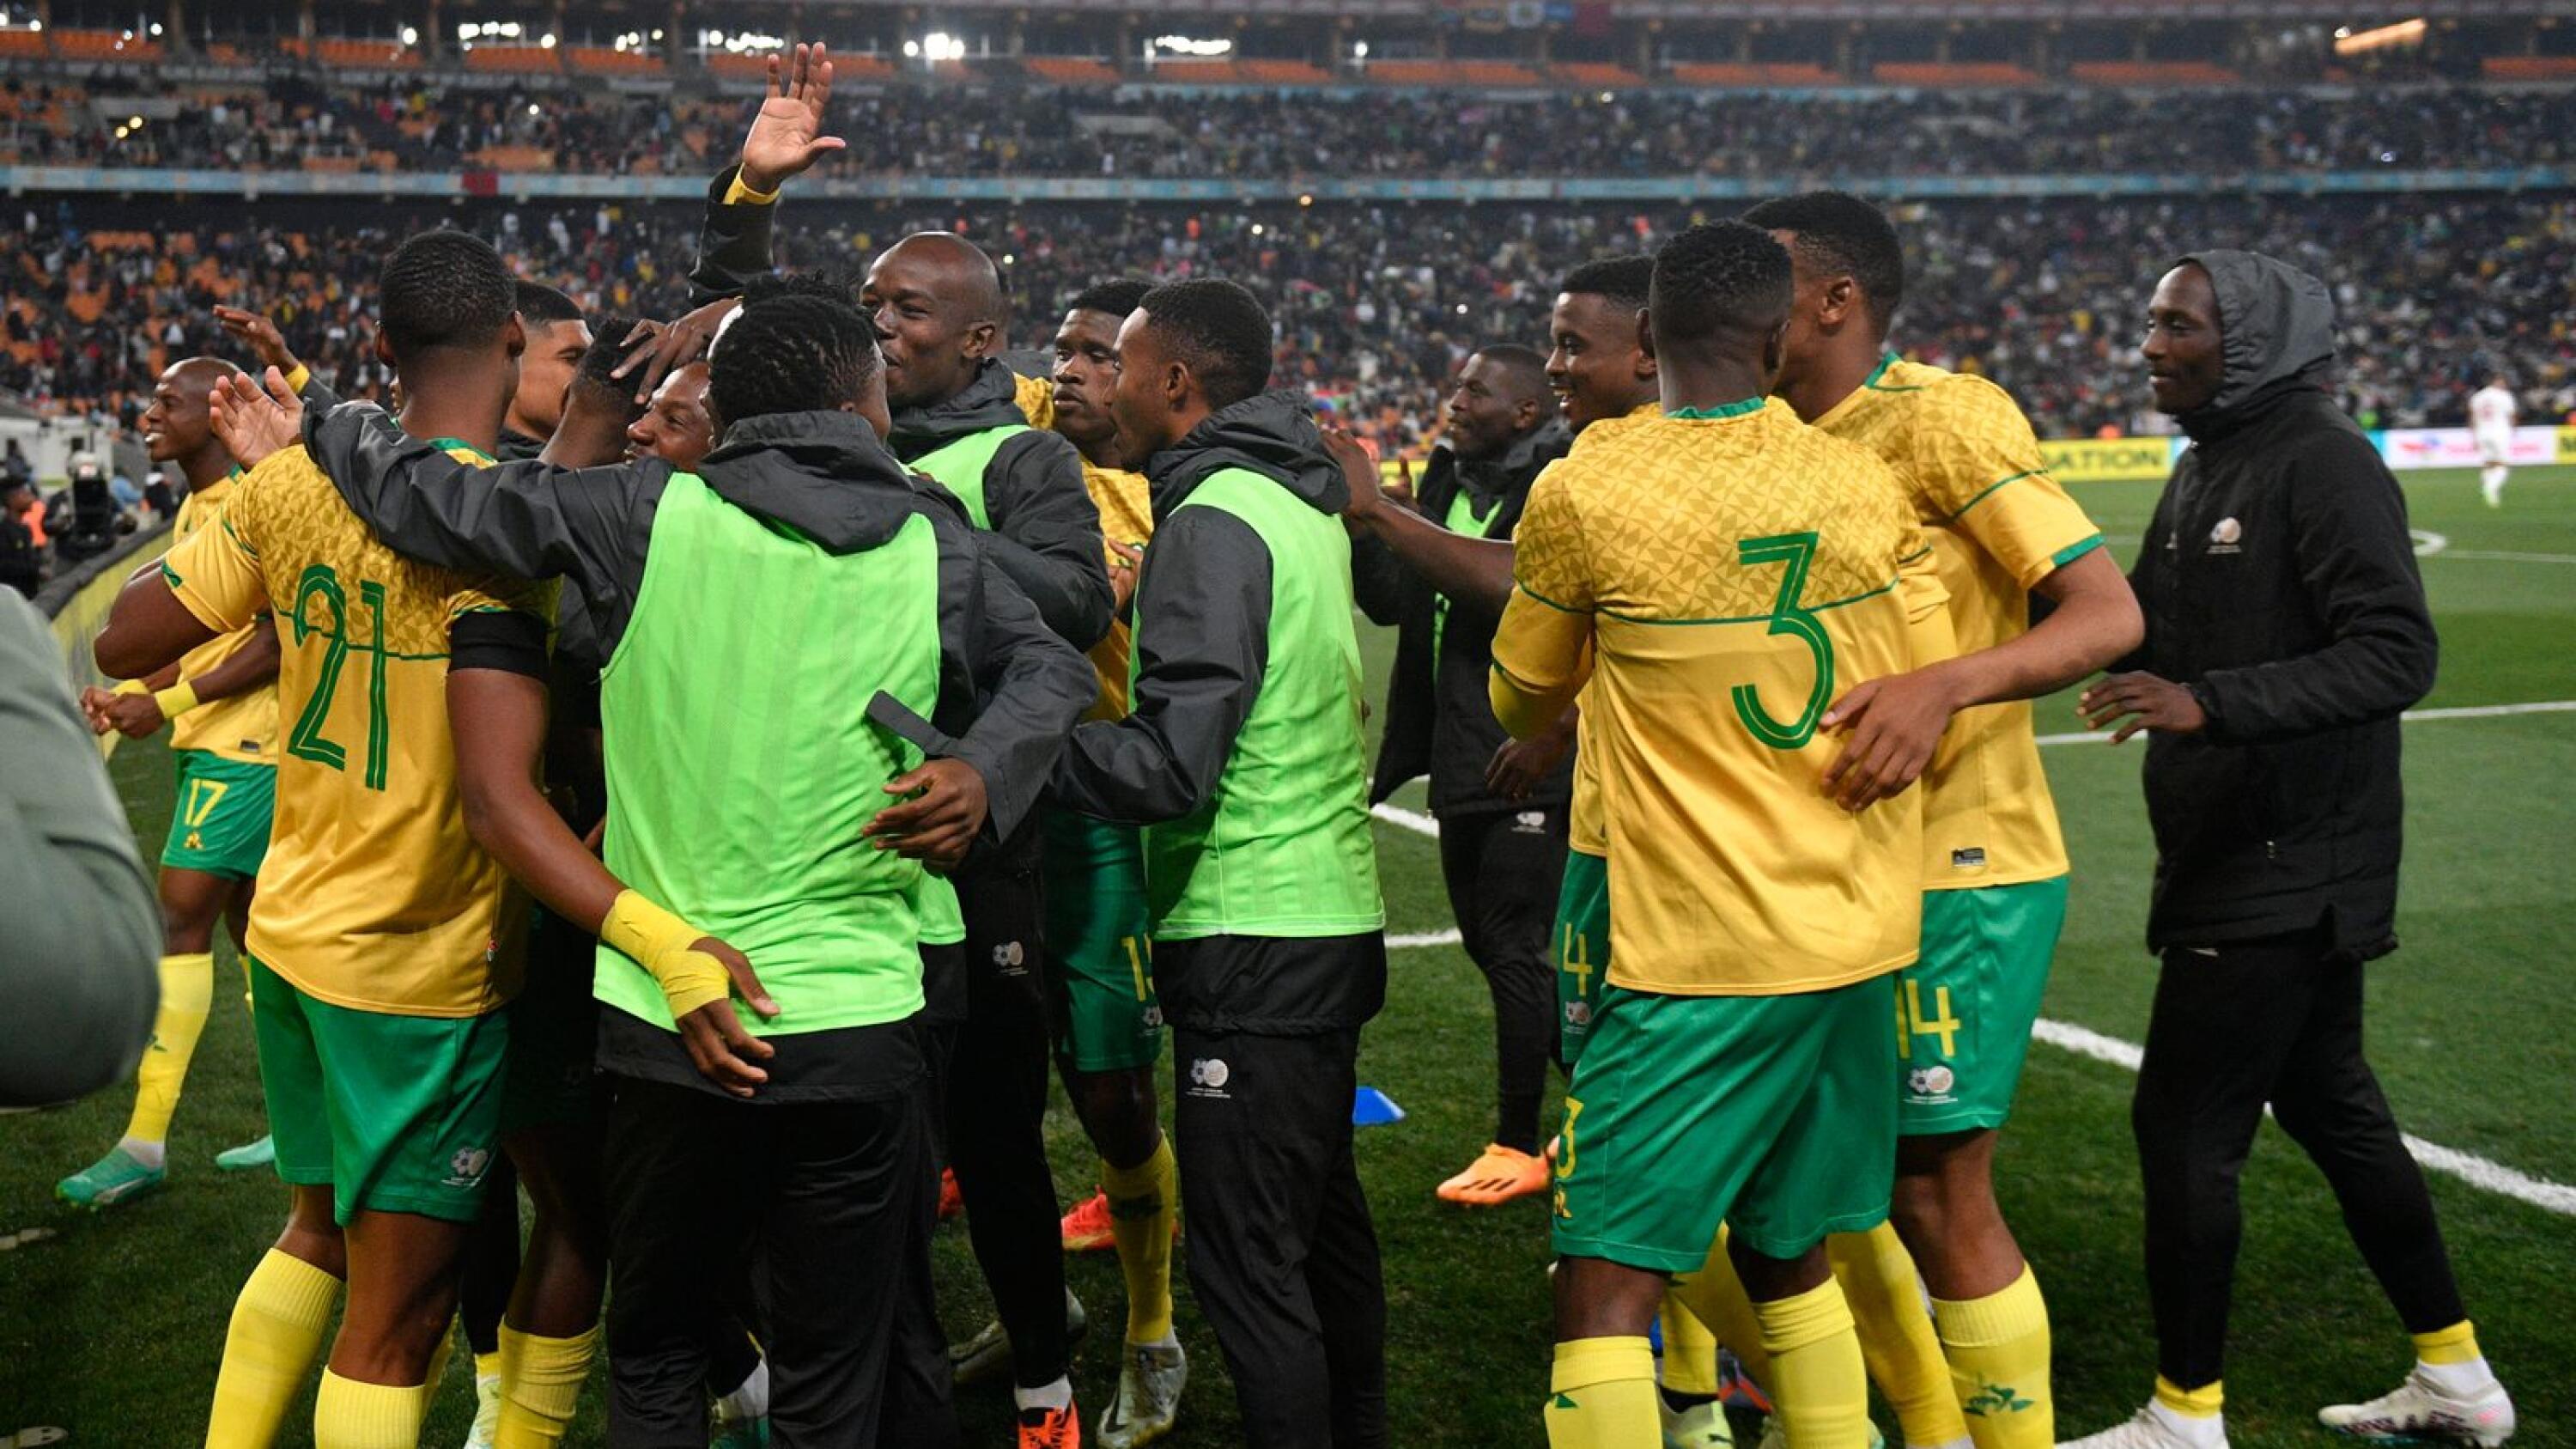 Bafana Bafana players celebrate Zakhele Lepasa’s goal during their Africa Cup of Nations qualifier against Morocco at FNB Stadium